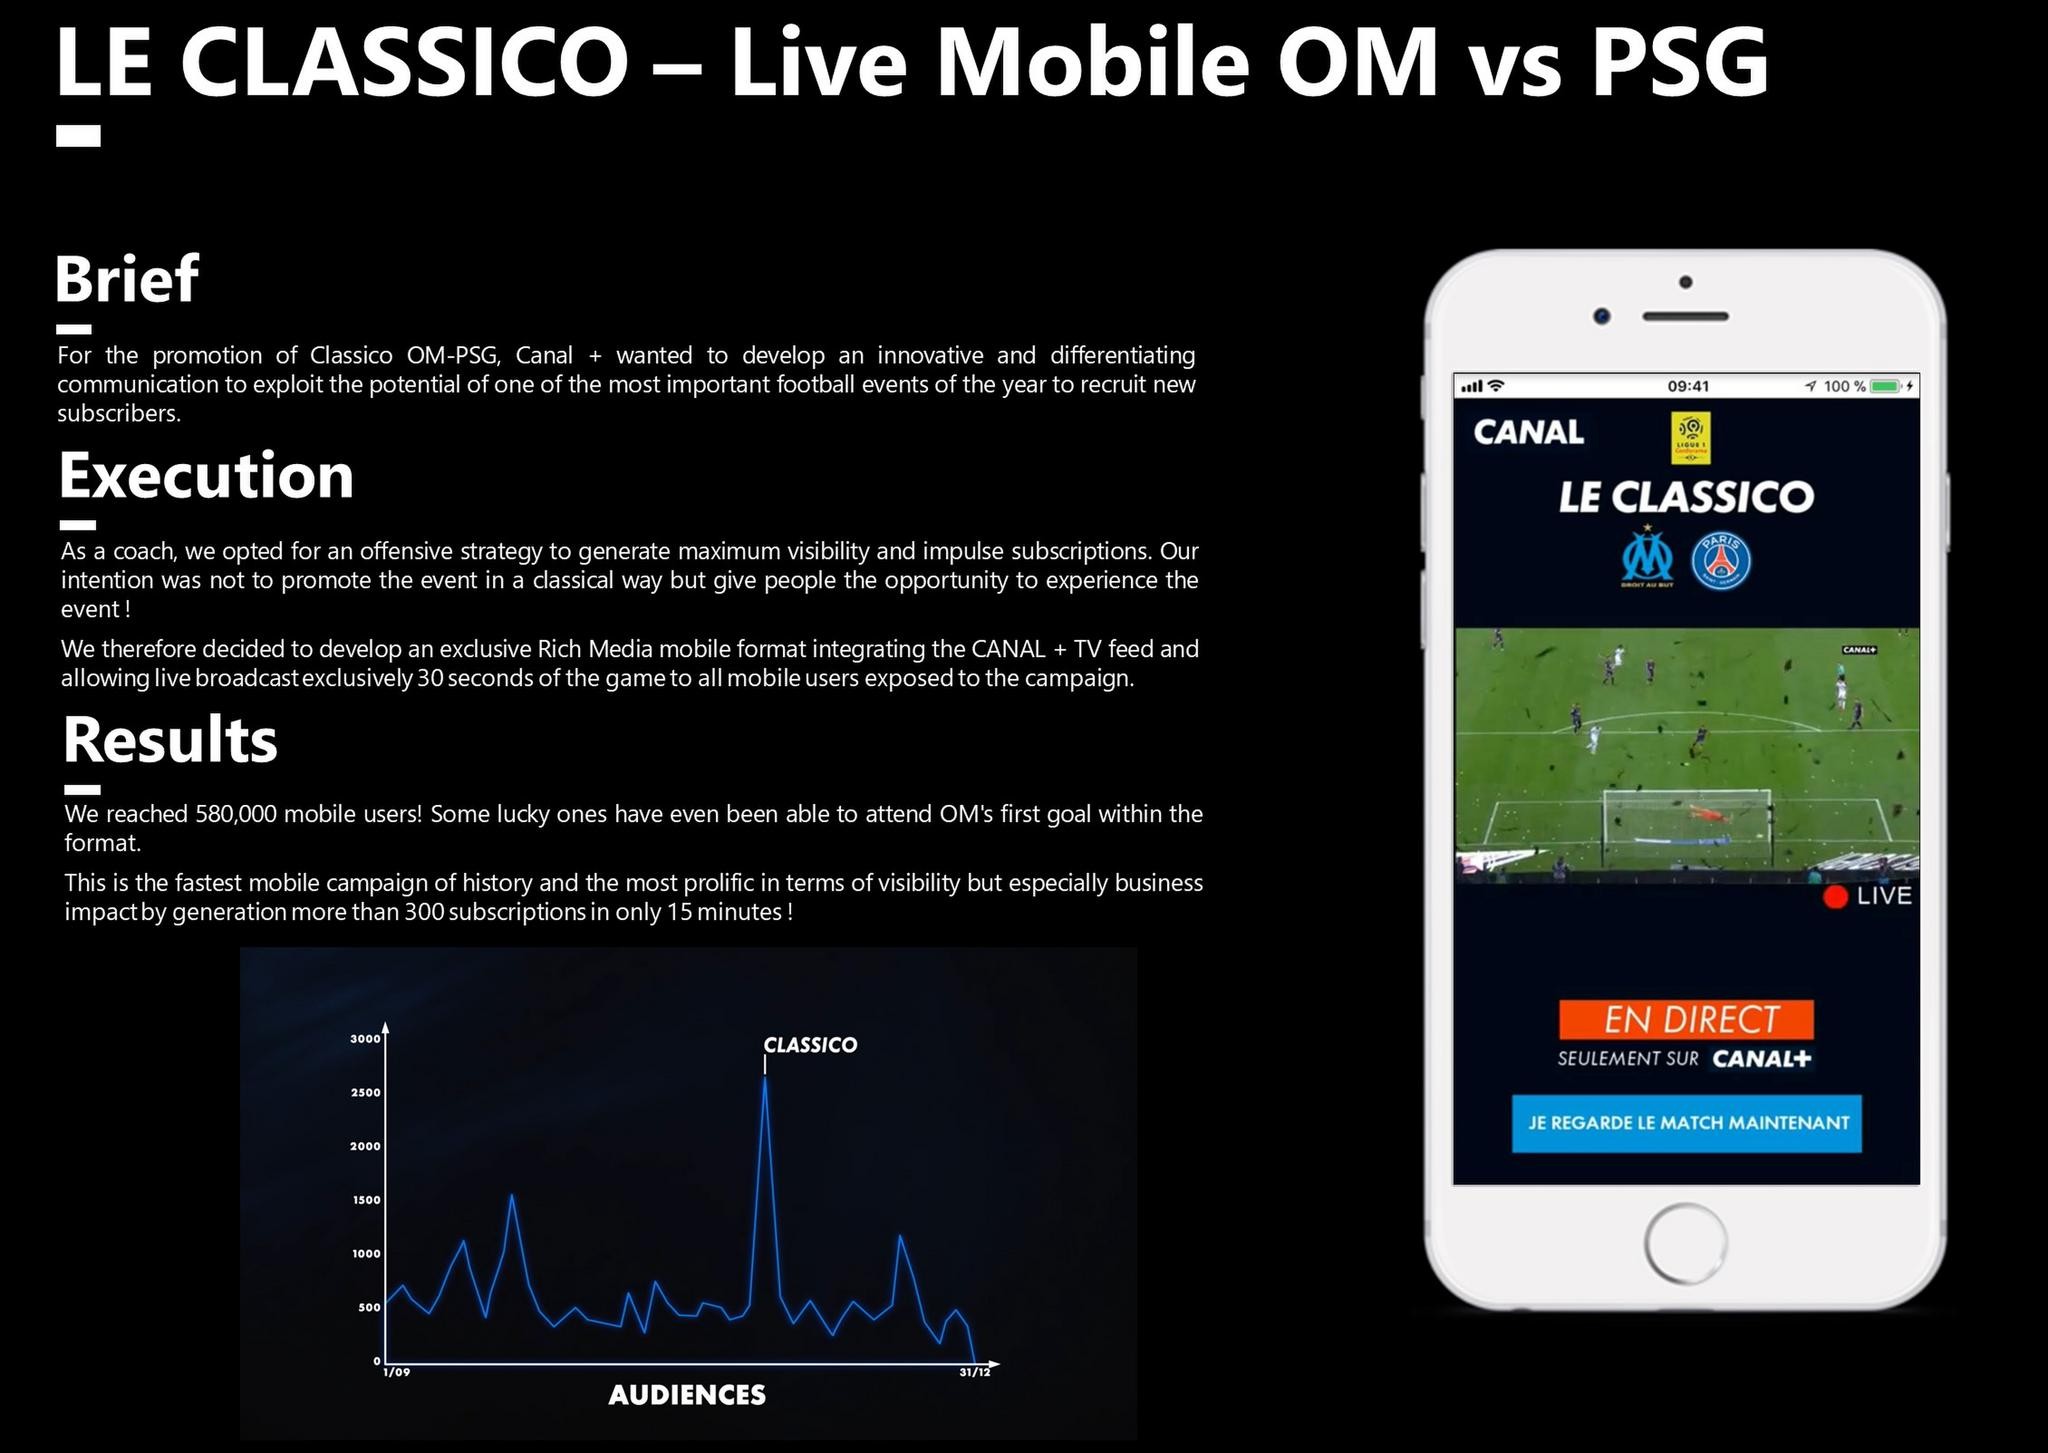 Canal+ Live Mobile OM - PSG